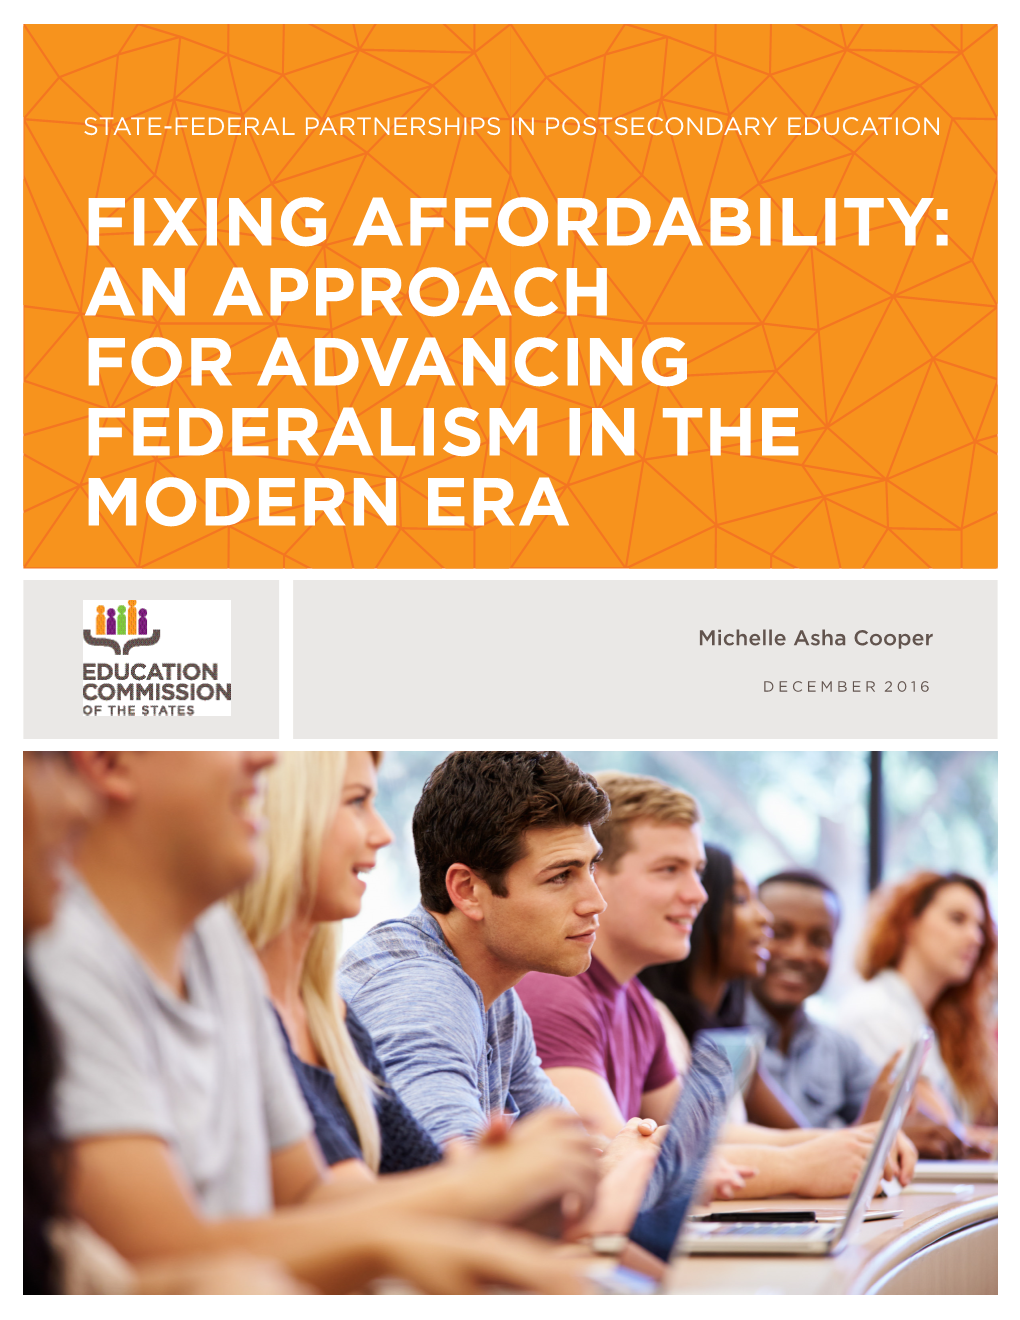 Fixing Affordability: an Approach for Advancing Federalism in the Modern Era